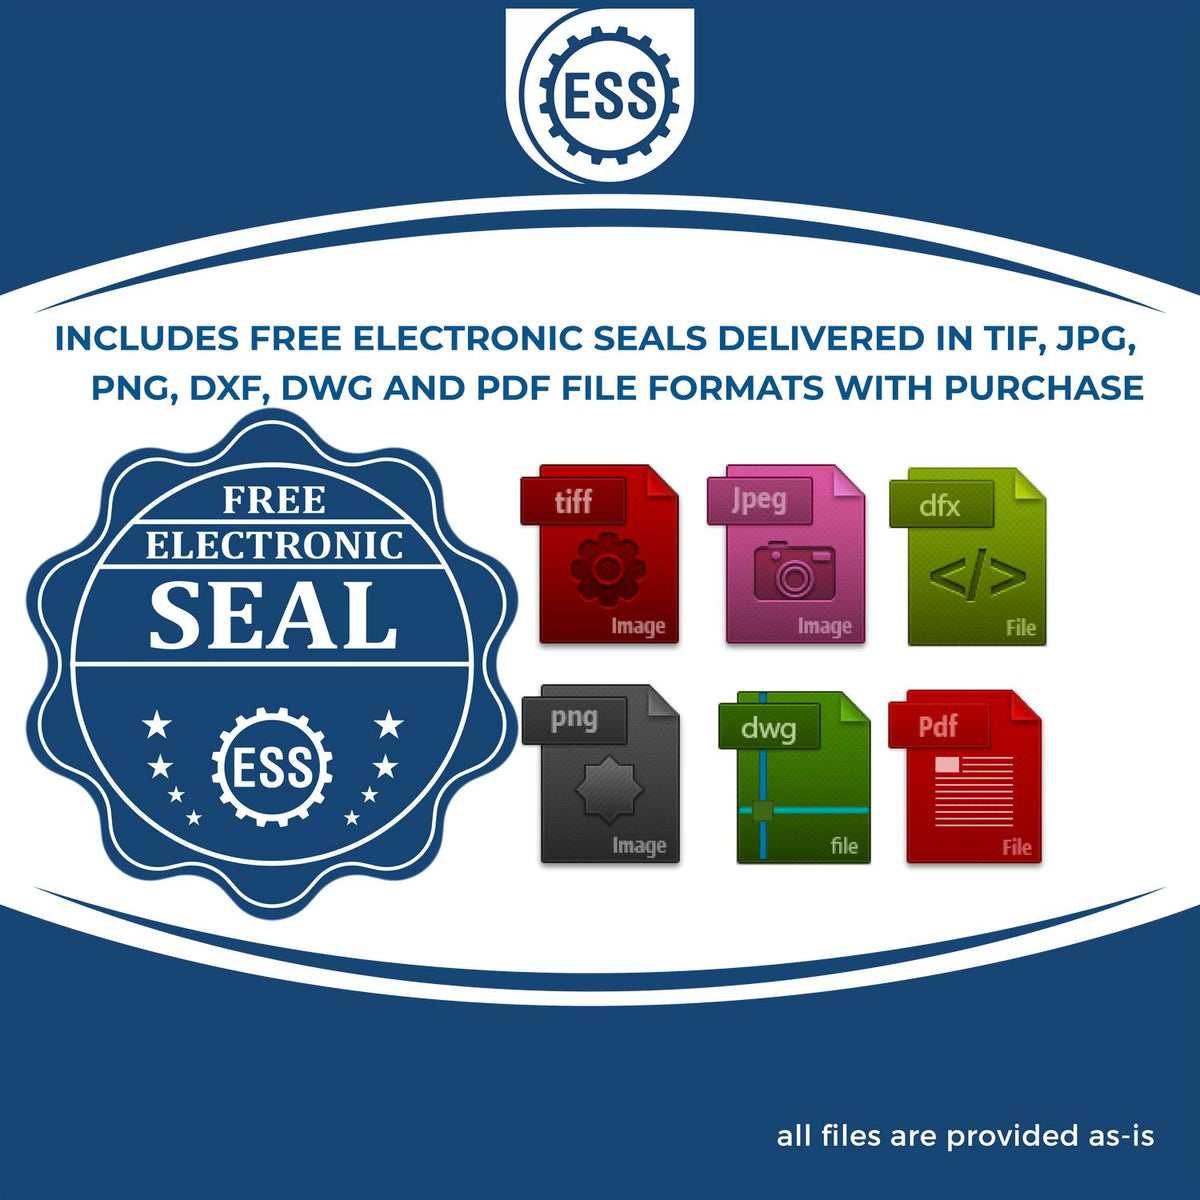 An infographic for the free electronic seal for the Gift Arkansas Geologist Seal illustrating the different file type icons such as DXF, DWG, TIF, JPG and PNG.